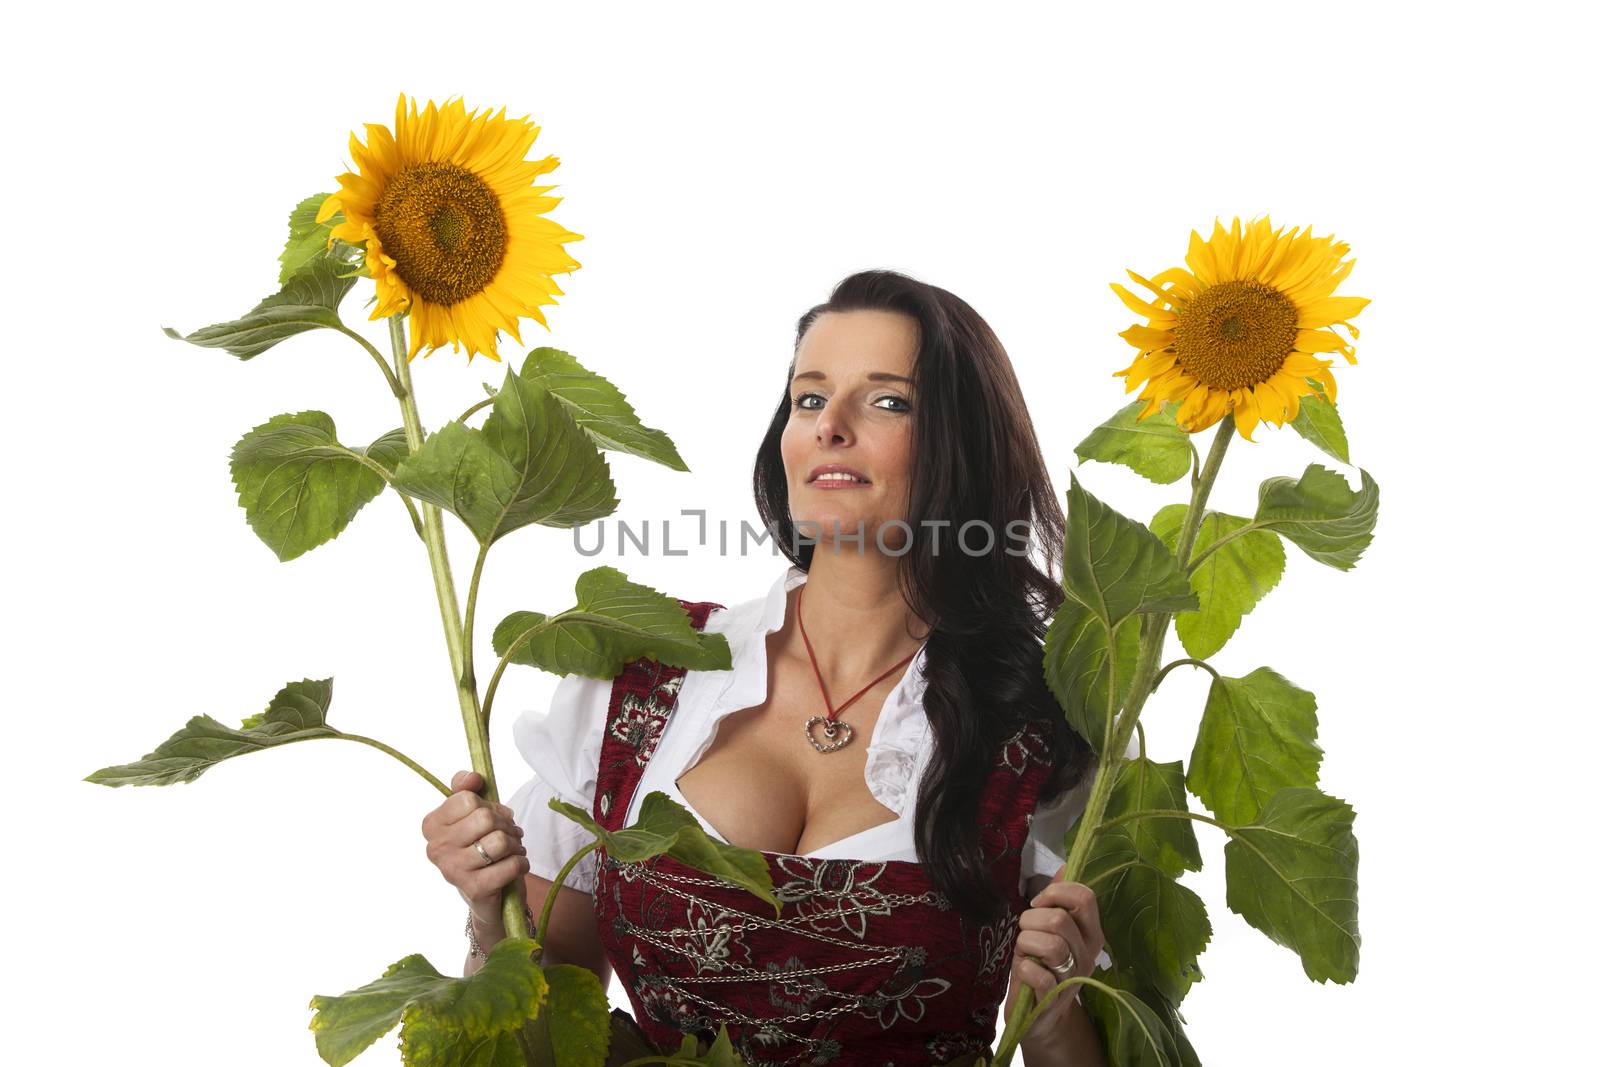 bavarian woman in a dirndl with sunflowers